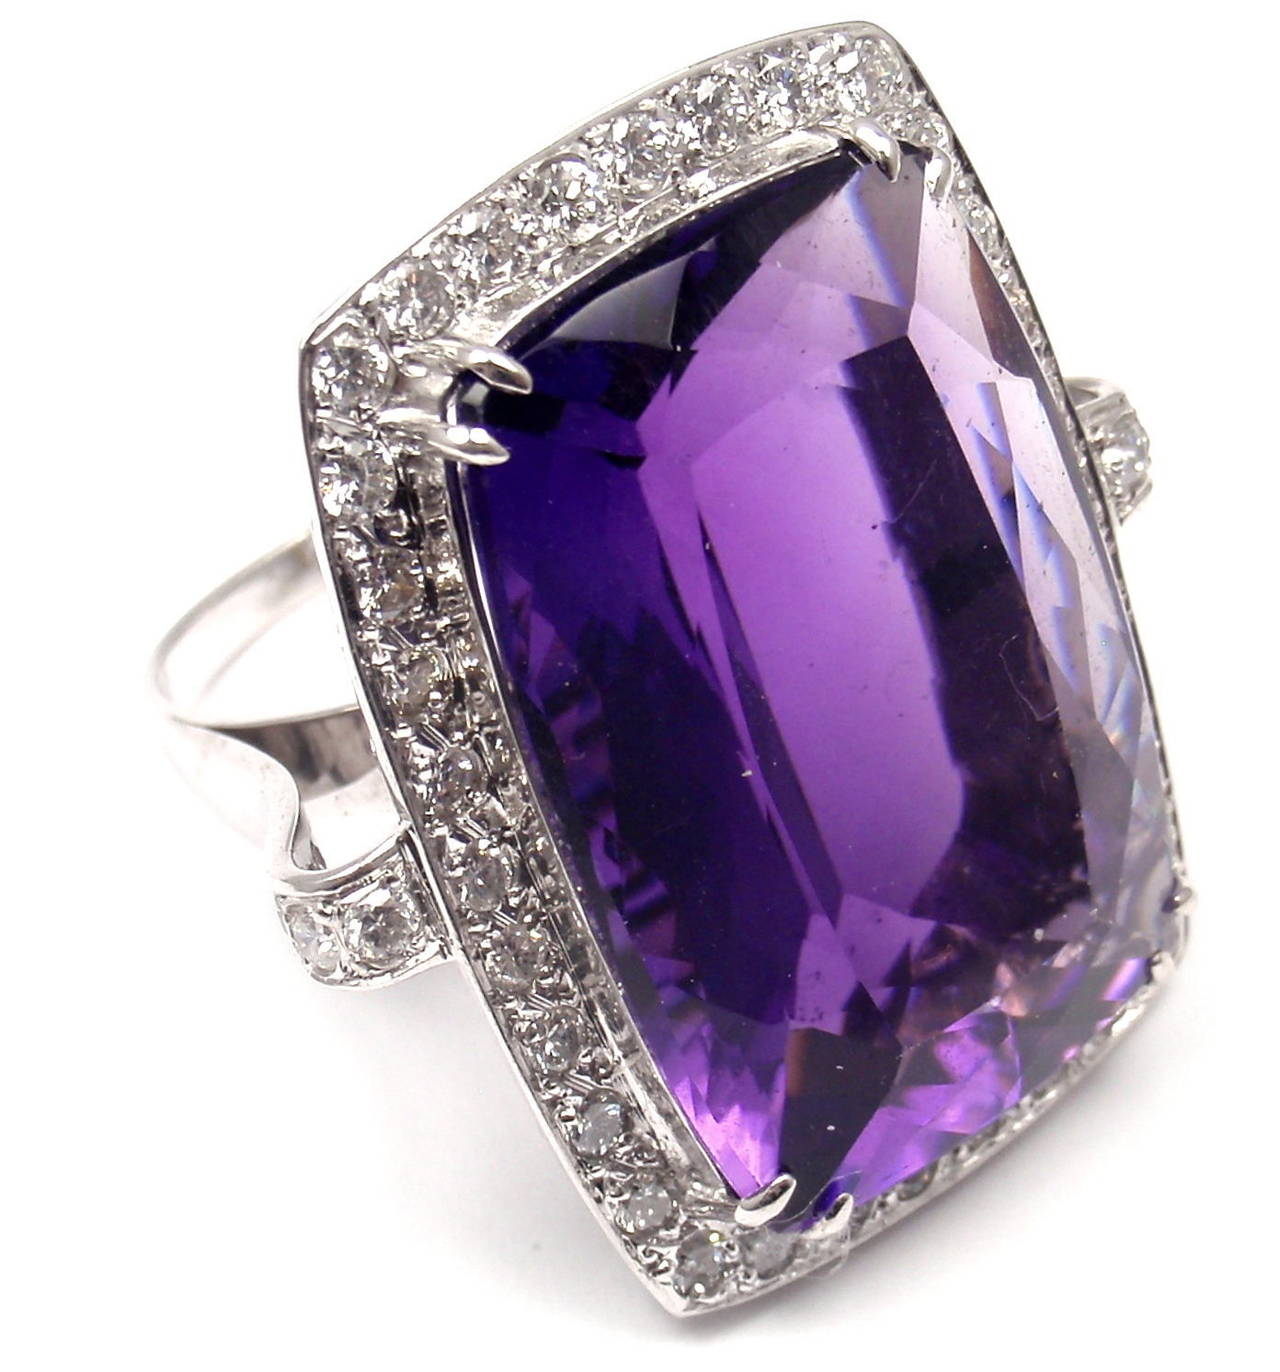 Estate 18k White Gold Diamond Large Amethyst Ring.
With 1.50 ctw in diamonds
1 large amethyst, 18 x 27mm in size

Measurements:
Size: 9
Weight: 16.3 g
Width: 2mm band, 32 x 24mm front

Stamped Hallmarks: Not clearly stamped but tested and